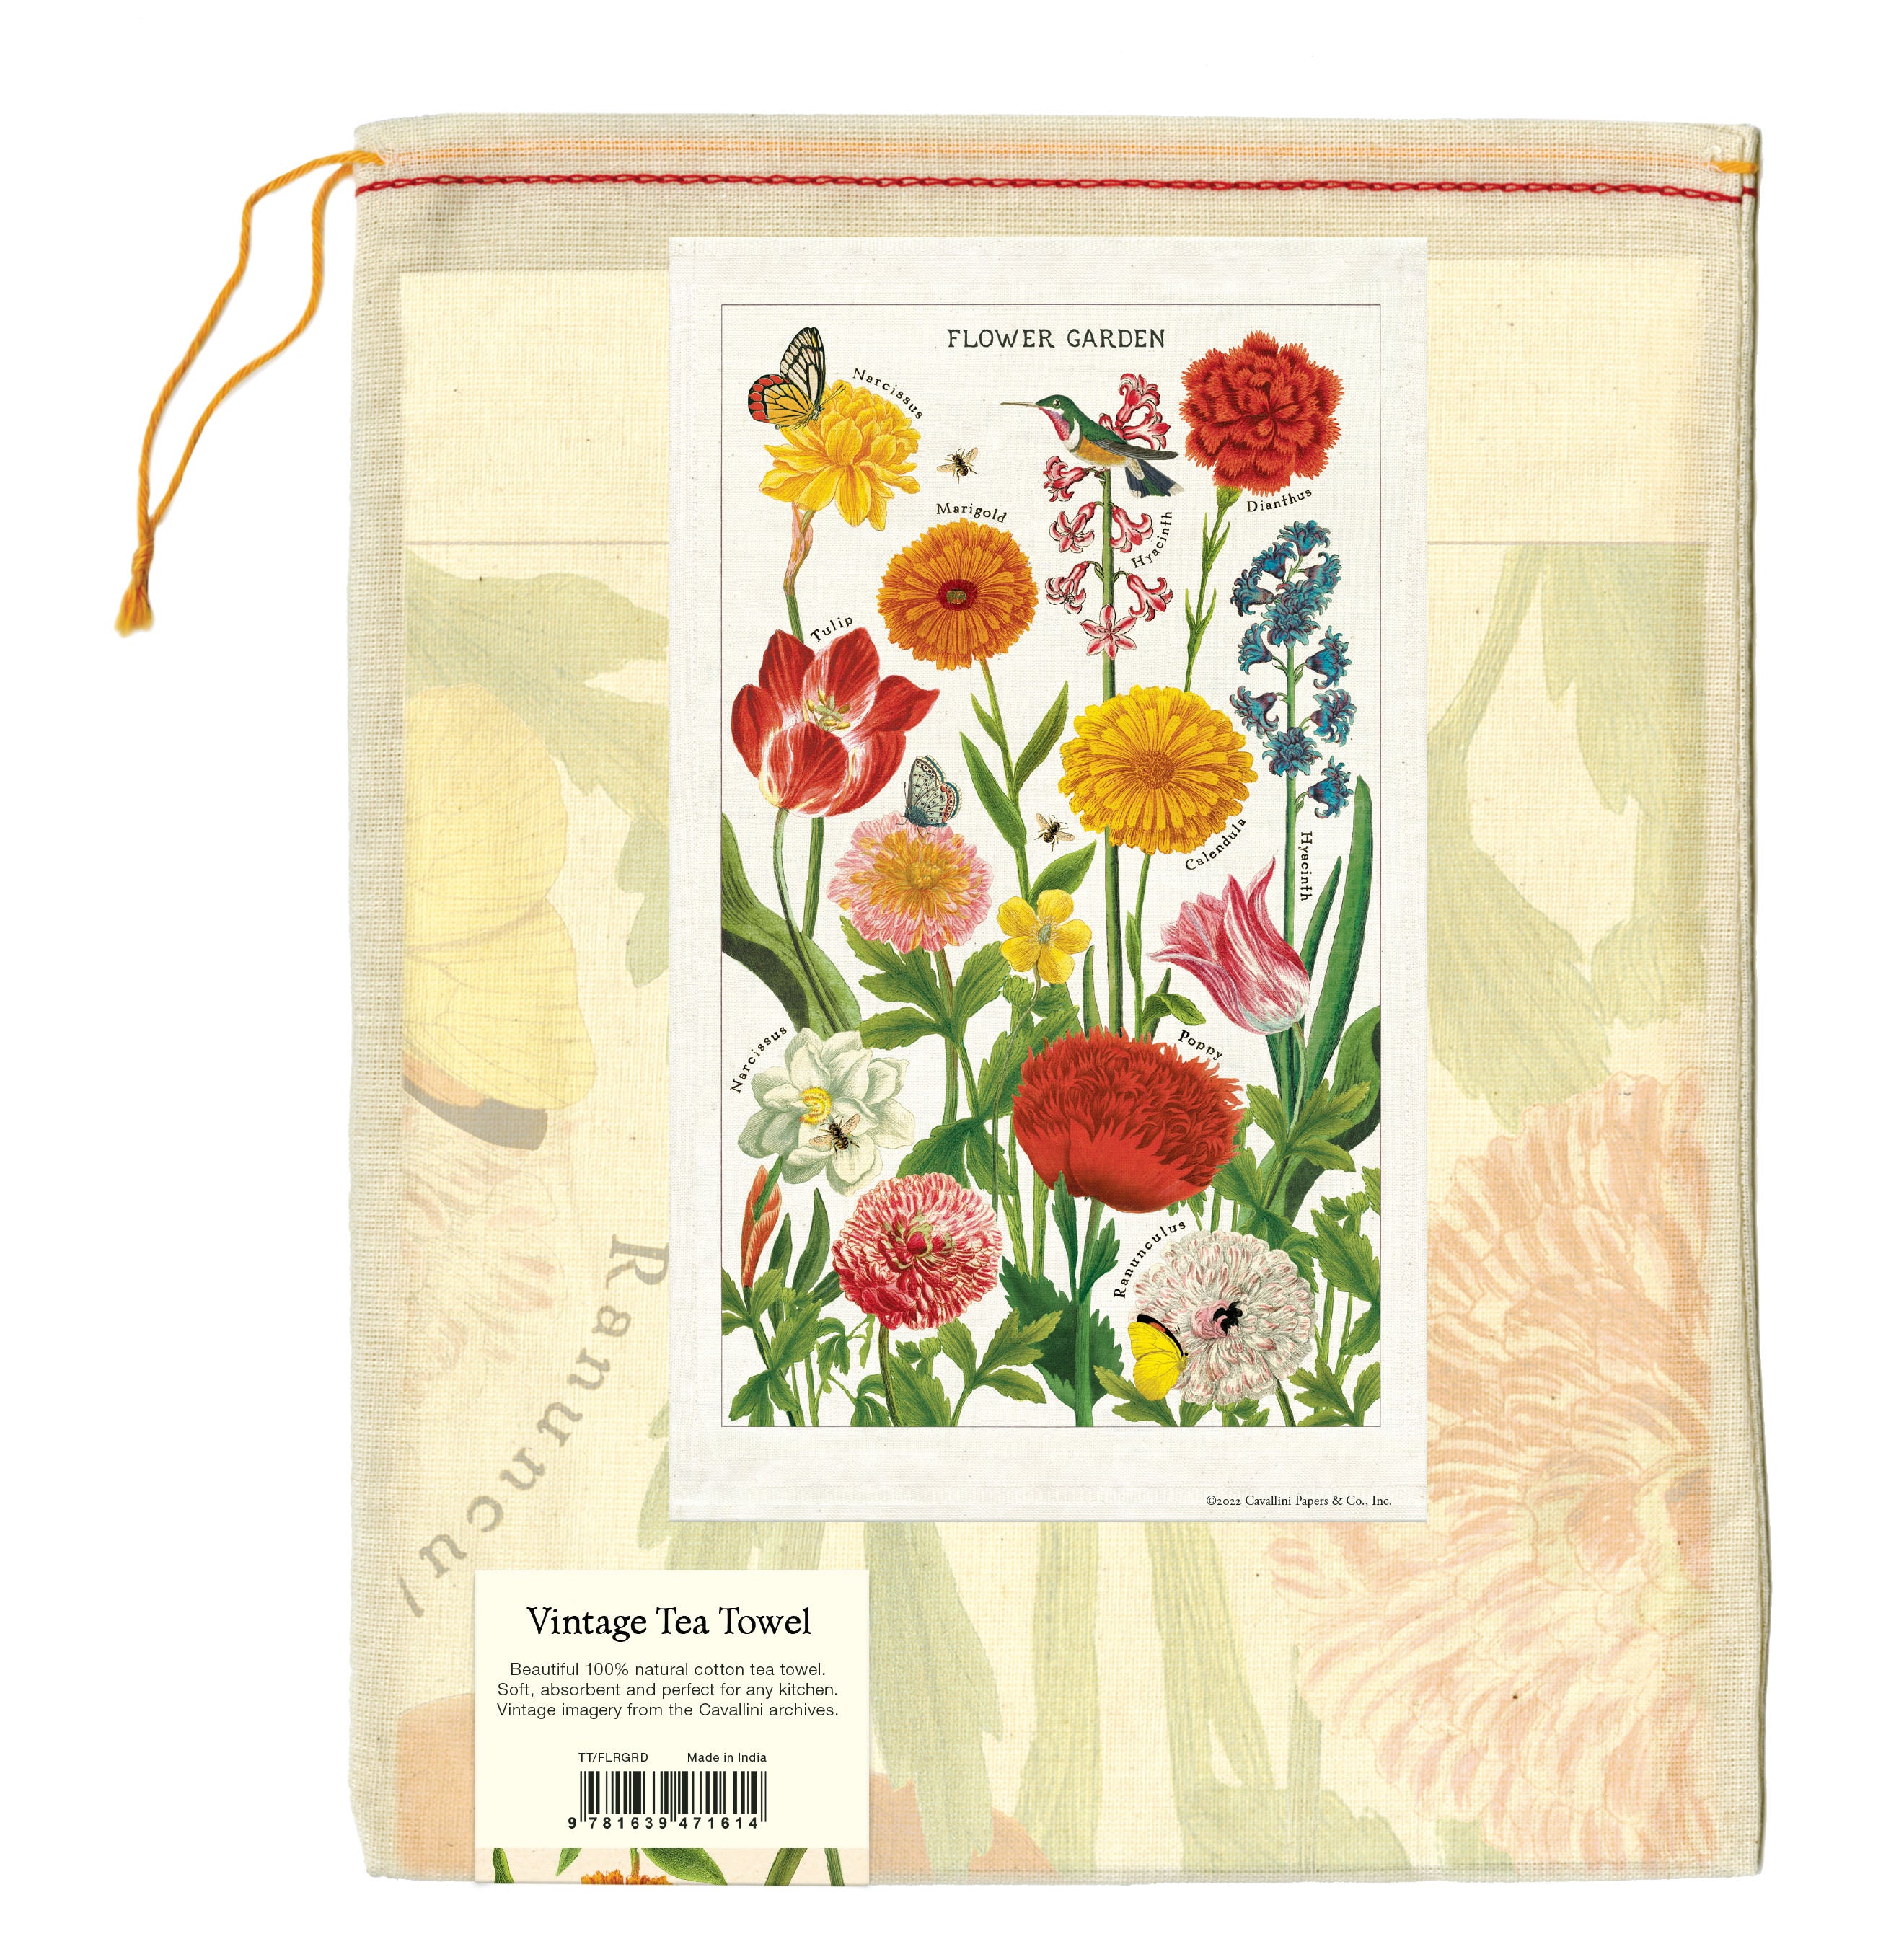 Cavallini & Co. Flower Garden Tea Towel  features large images of beautiful, brightly colored garden flowers- tulips, marigolds, hyacinth, dianthus and more. The perfect way to bring color into your kitchen. 